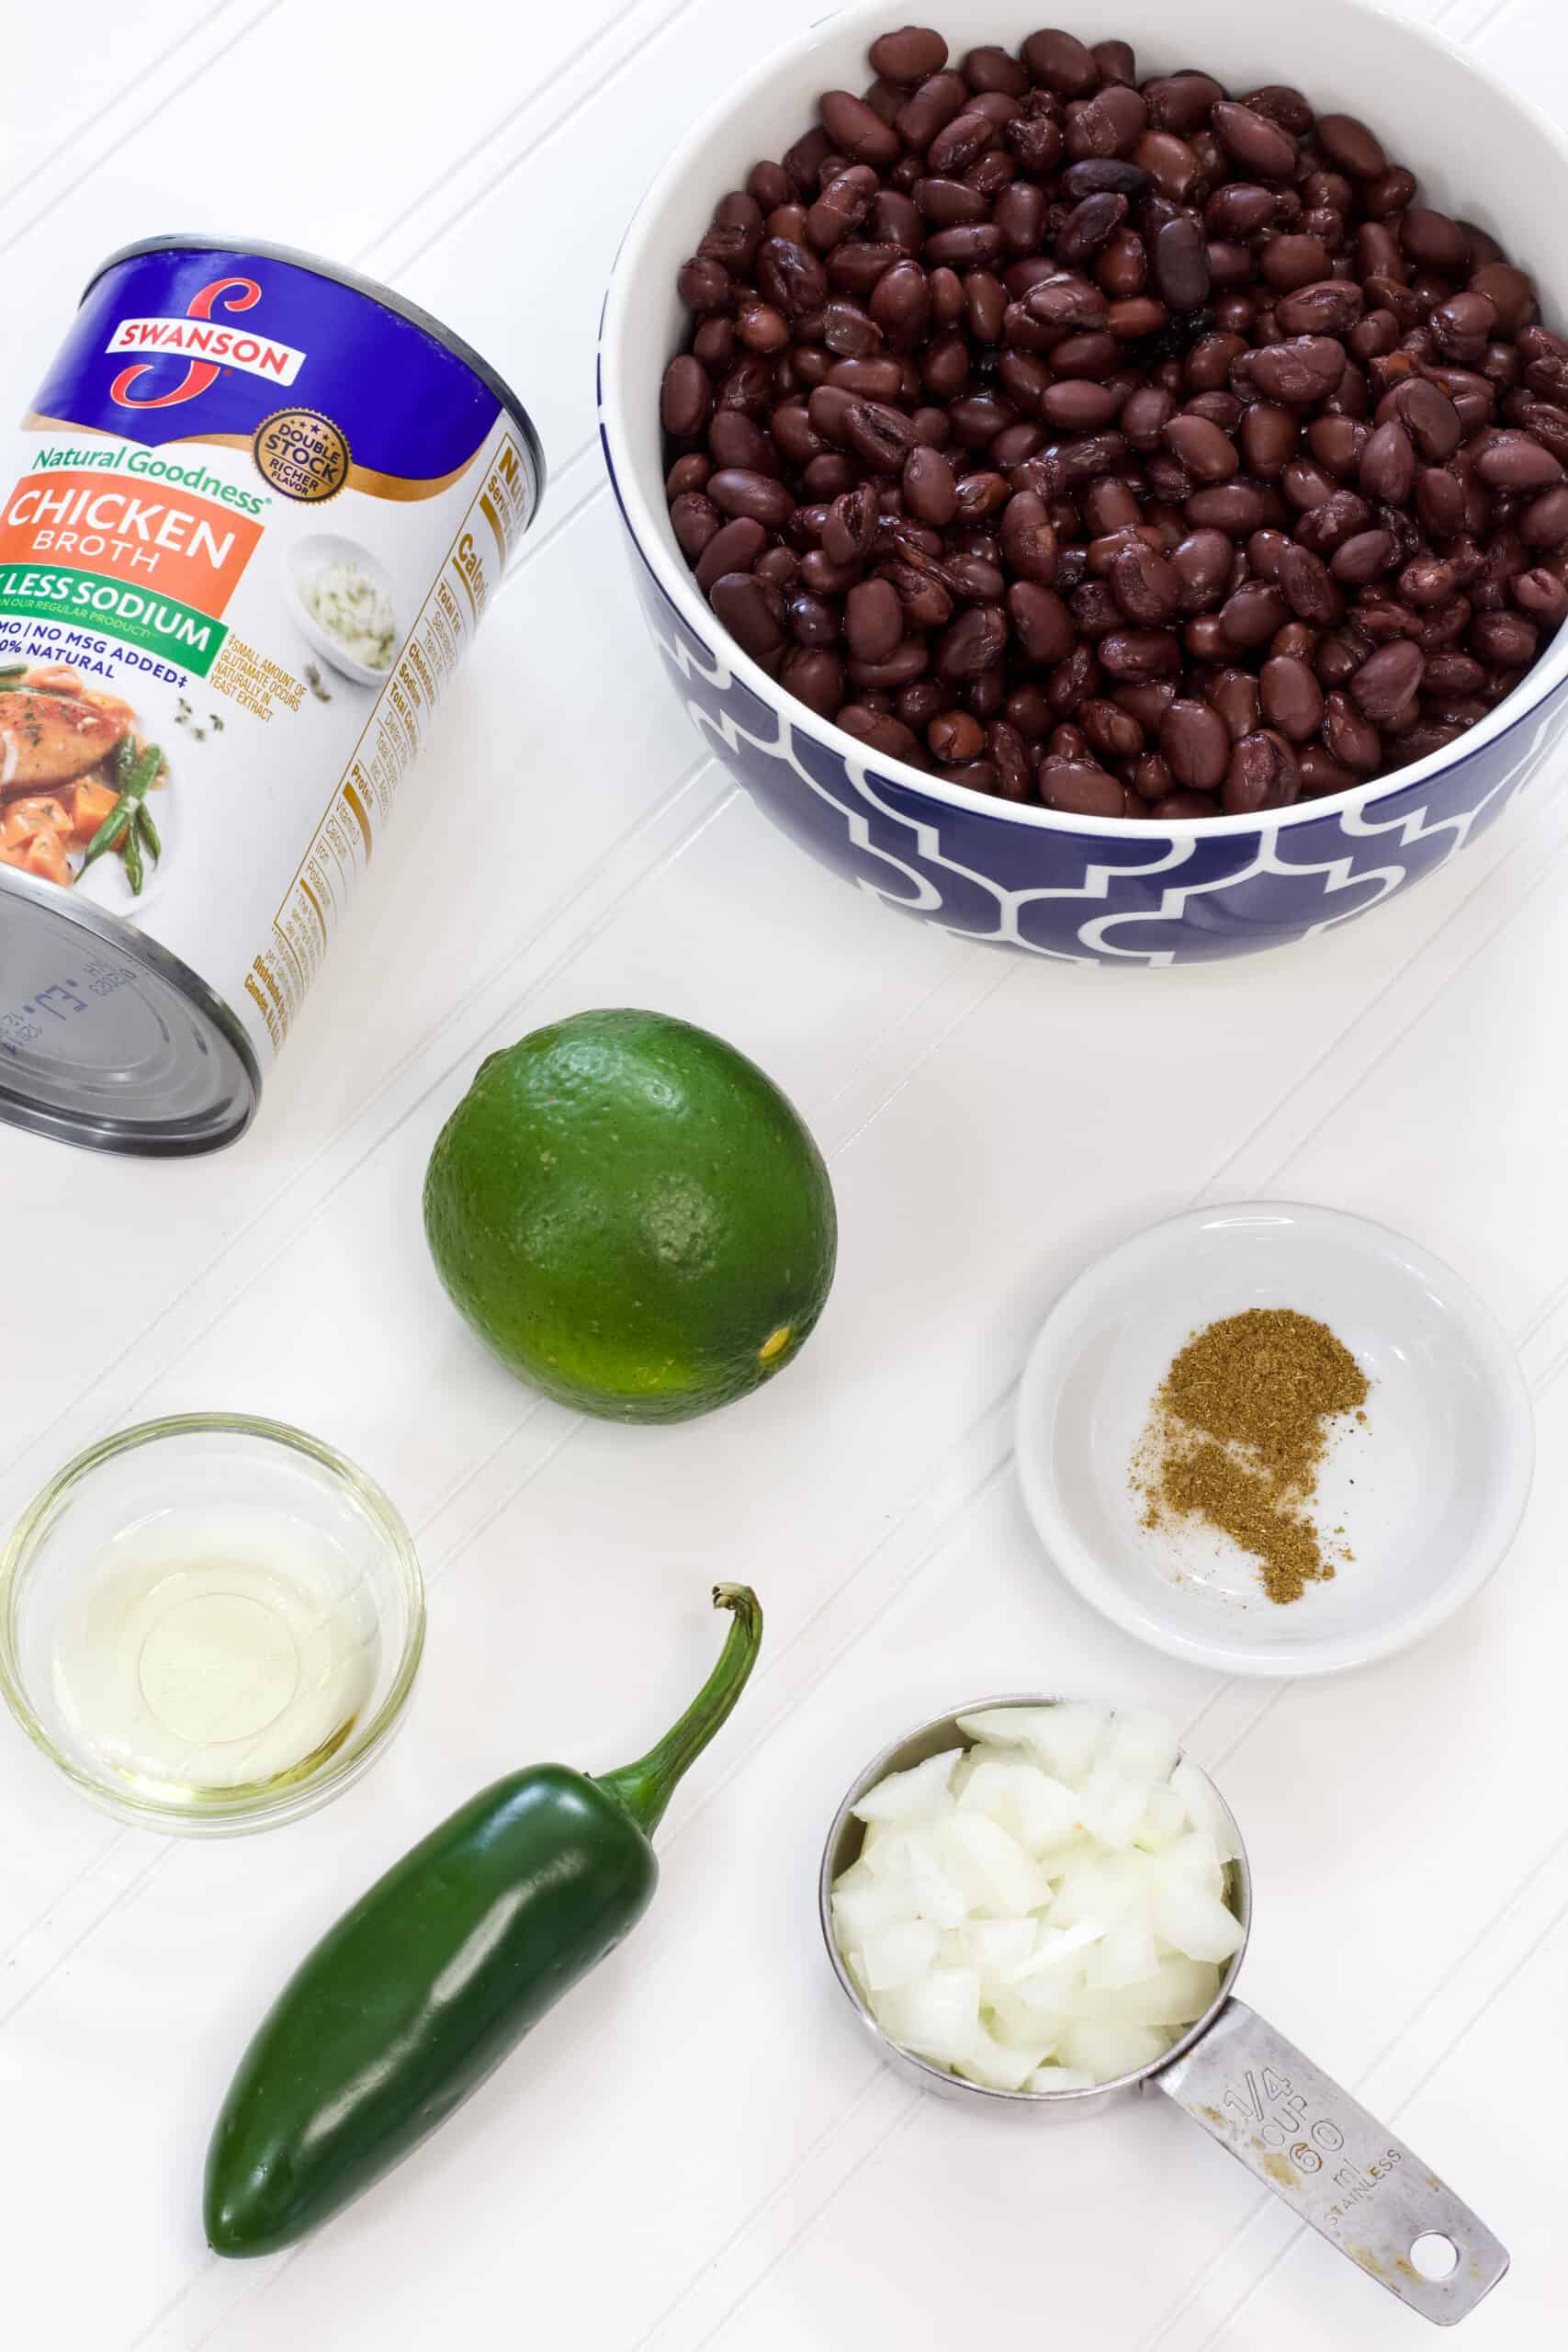 All six ingredients needed to make Easy Mexican Black Beans Recipe (with canned beans) laying on a white background.